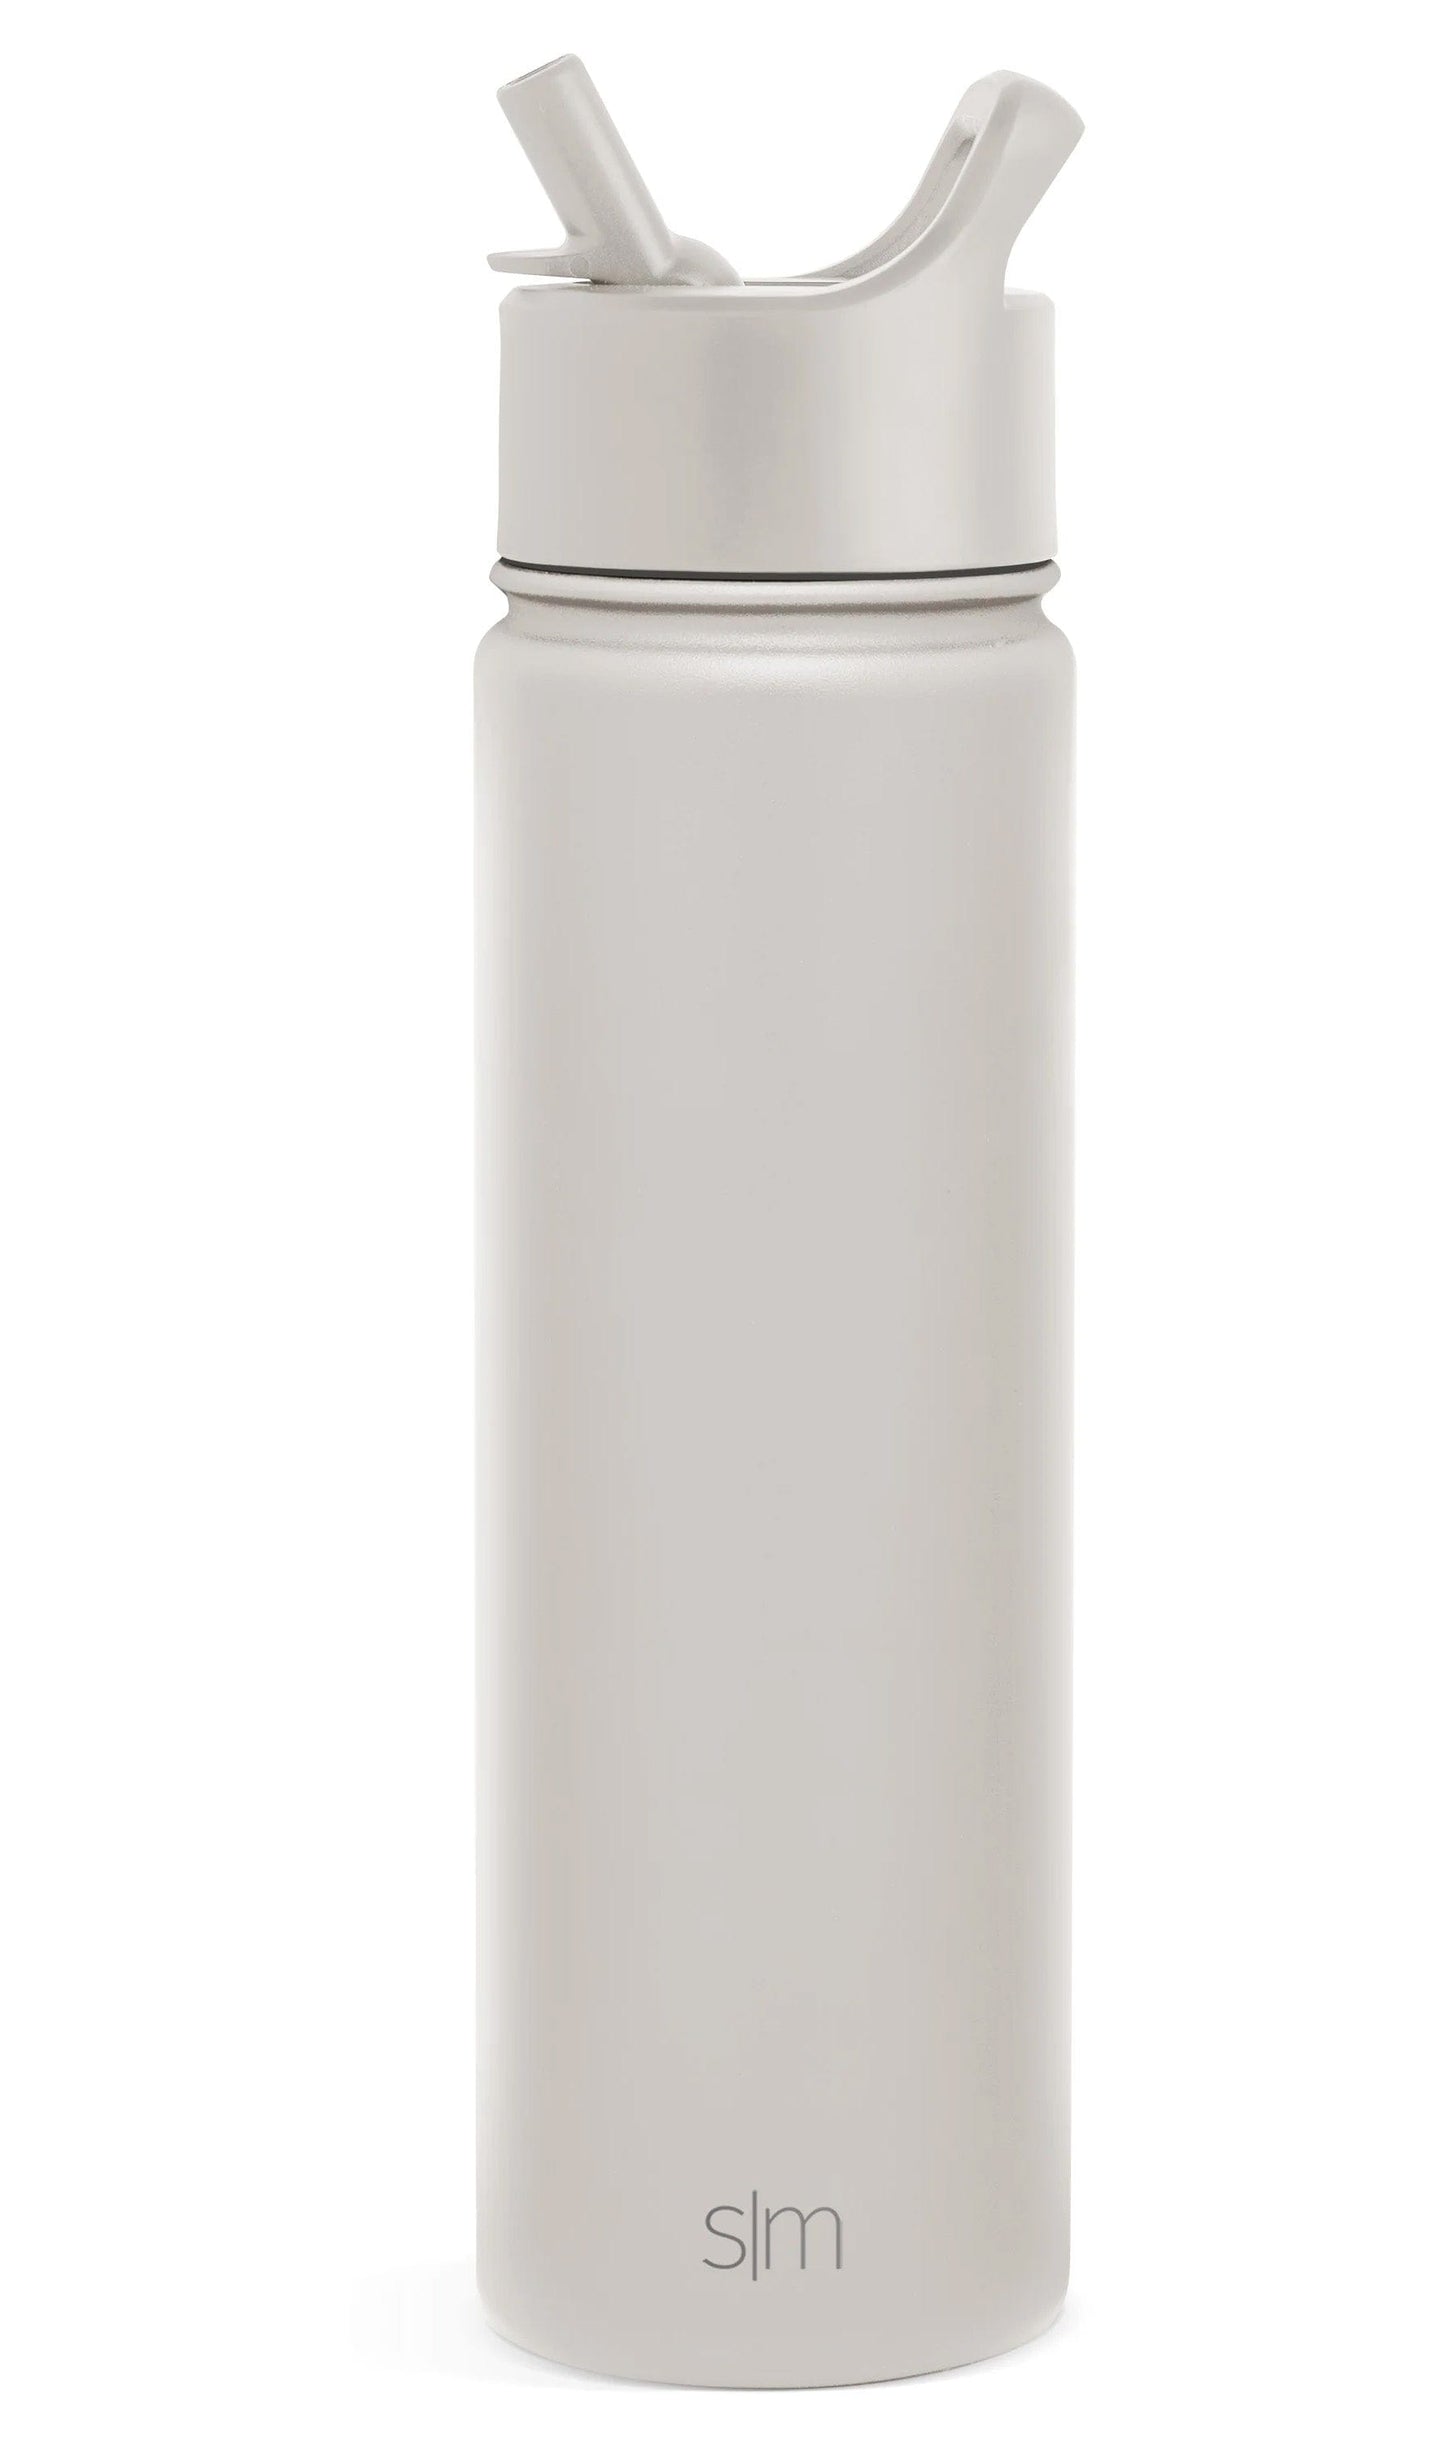 Simple Modern Water Bottle with Straw Lid Vacuum Insulated Stainless Steel Thermos Bottles | Leak Proof Flask | Summit | 22oz, Almond Birch